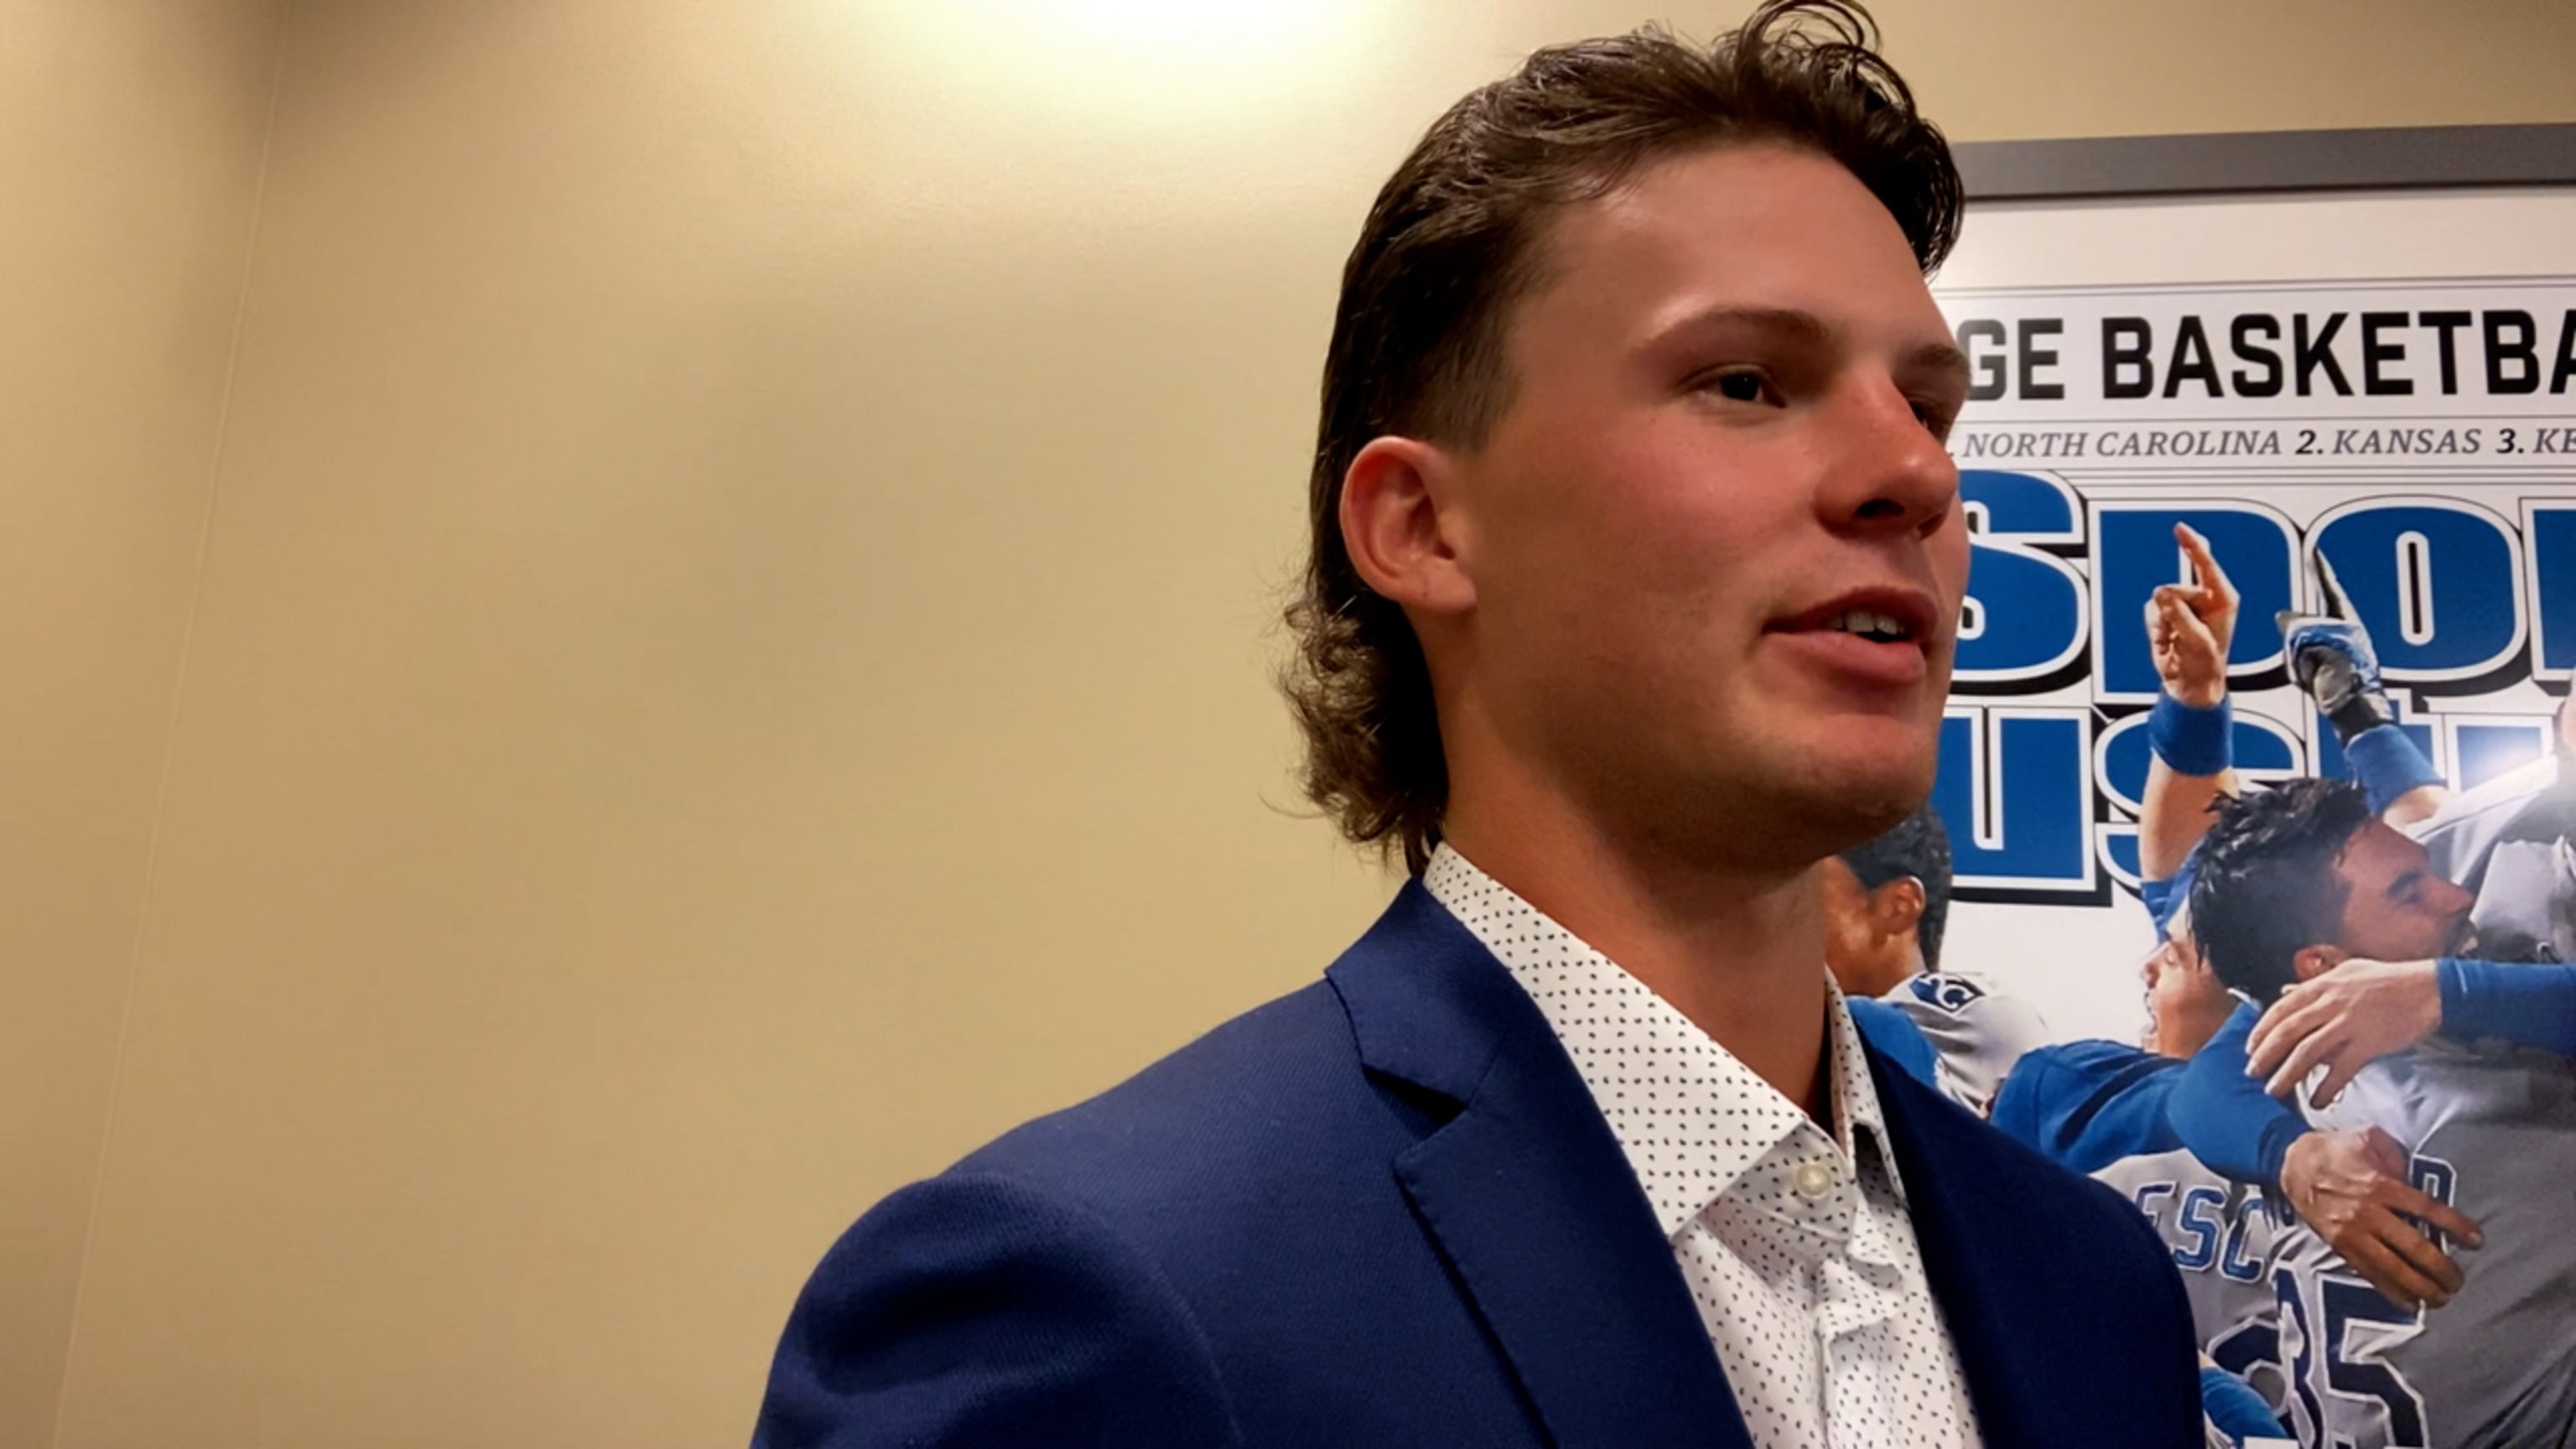 Bobby Witt Jr.: 2021 Minor League Player Of The Year — College